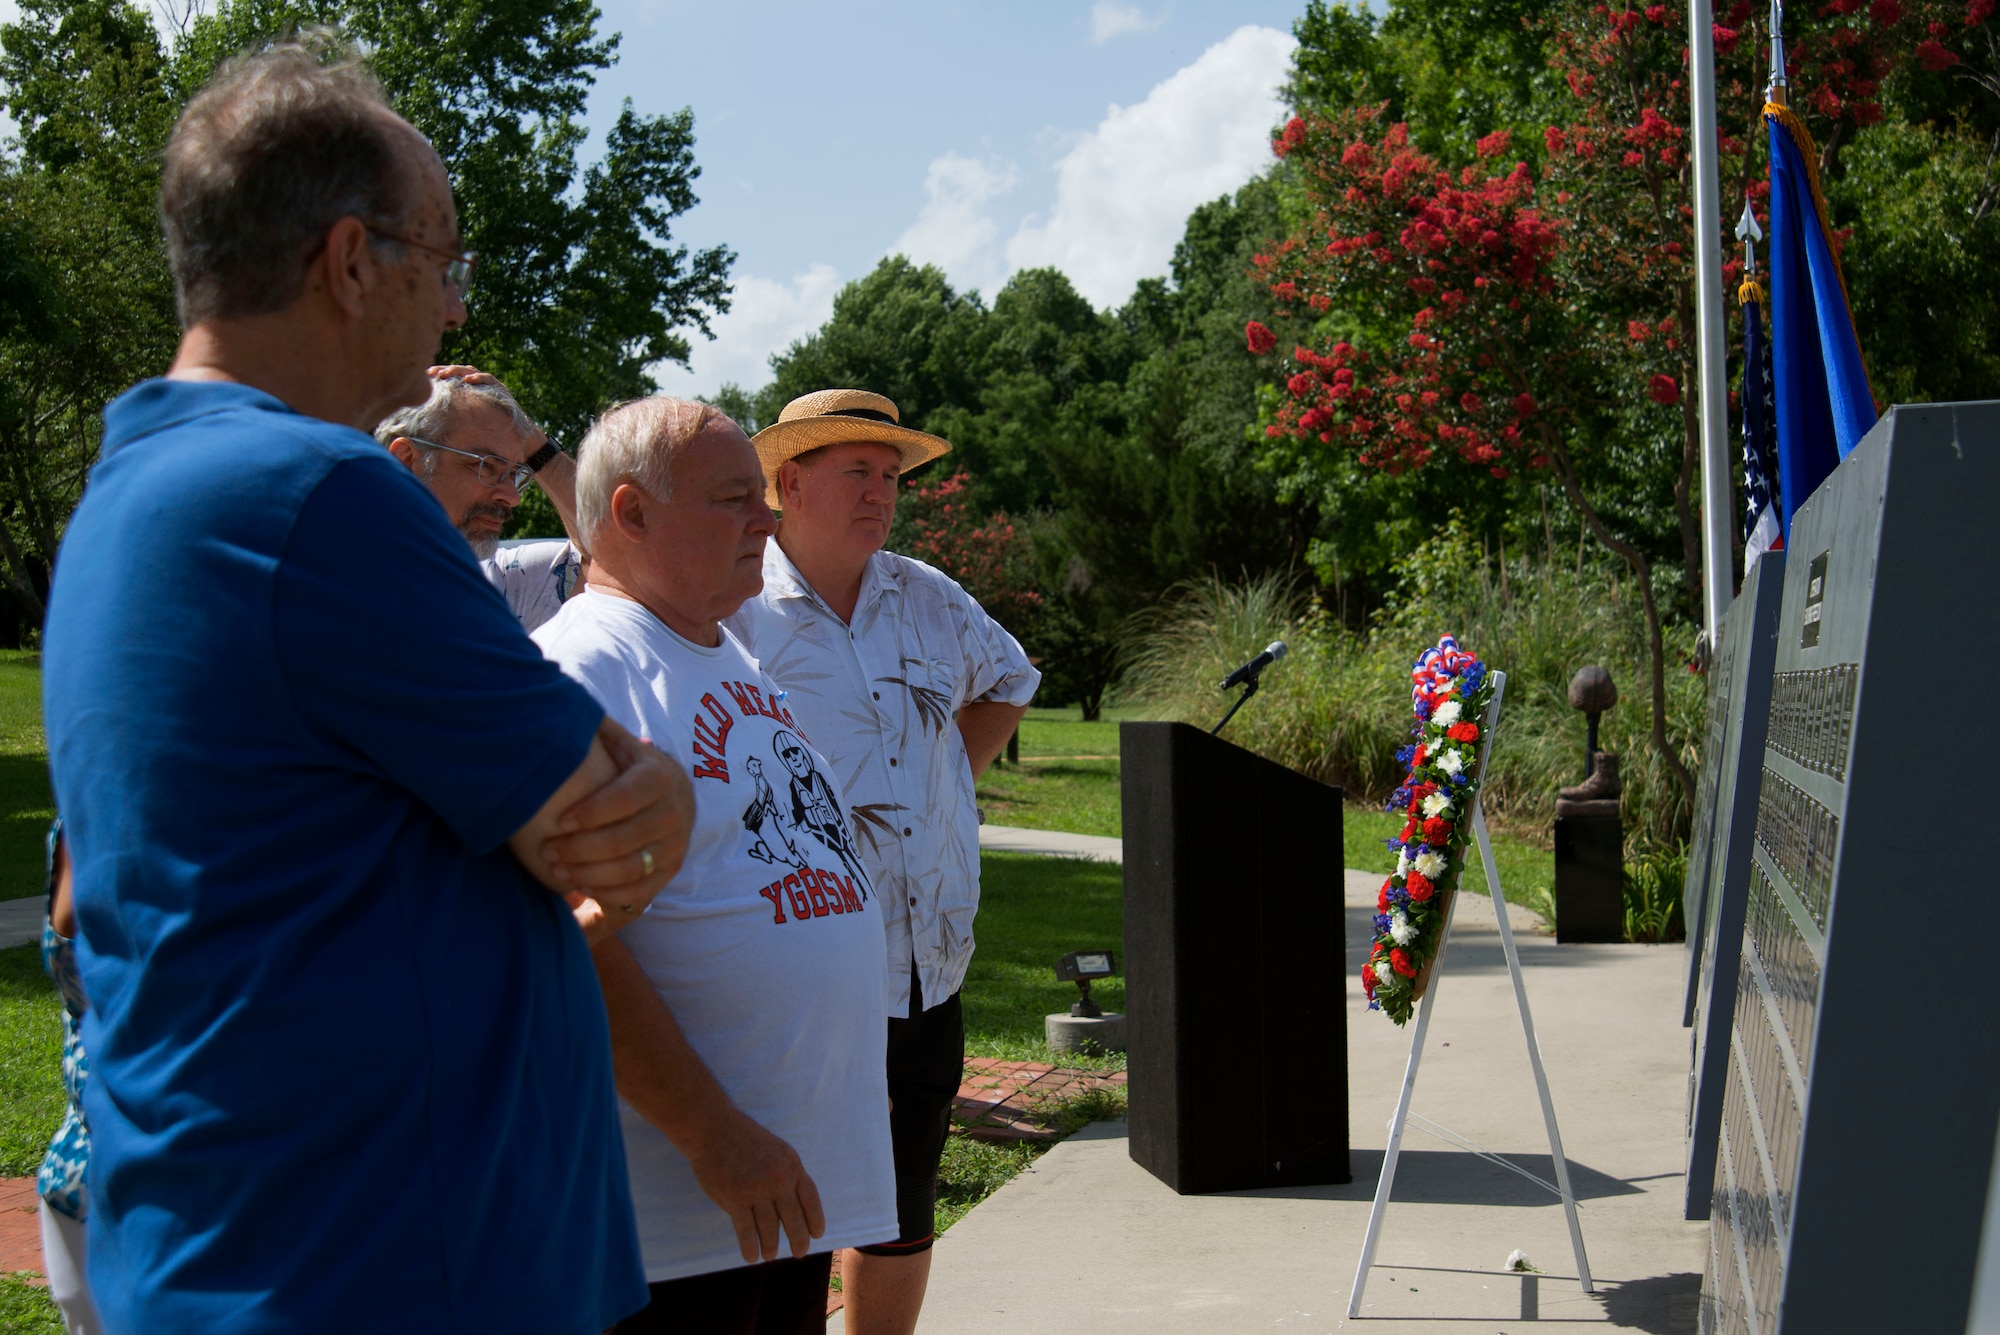 U.S. Air Force veterans read names on the Fallen Airmen Memorial at Shaw Air Force Base, S.C., June 23, 2017. The former Wild Weasels attended a wreath laying ceremony honoring the fallen during their reunion trip, which celebrated the 52nd Wild Weasel anniversary. (U.S. Air Force photo by Airman 1st Class Kathryn R.C. Reaves)